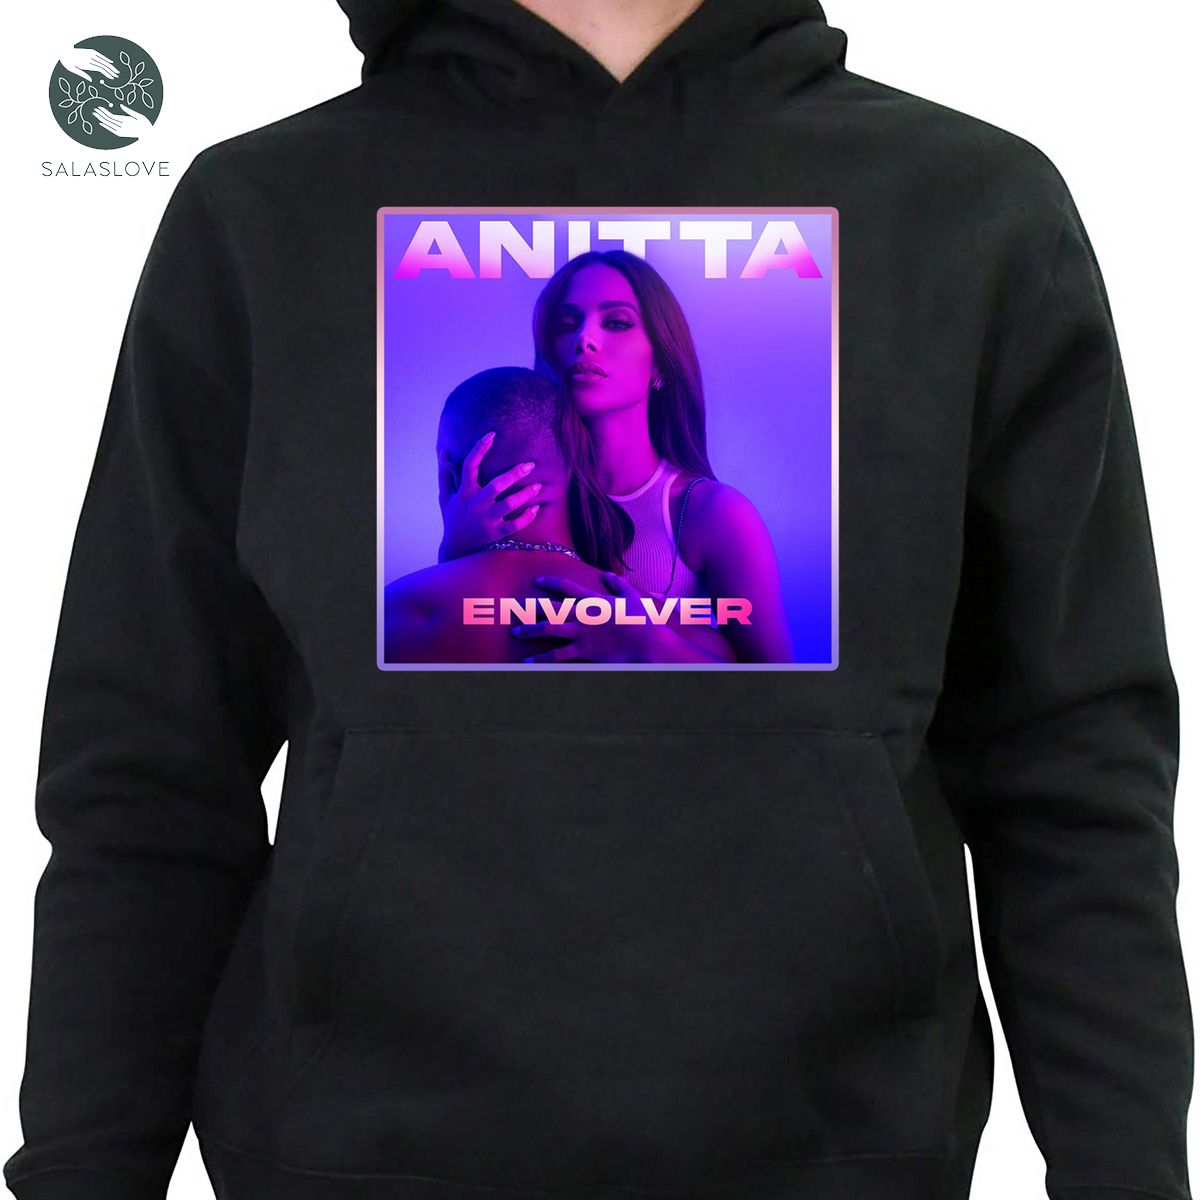 Anitta With New Song Envolver Hoodie